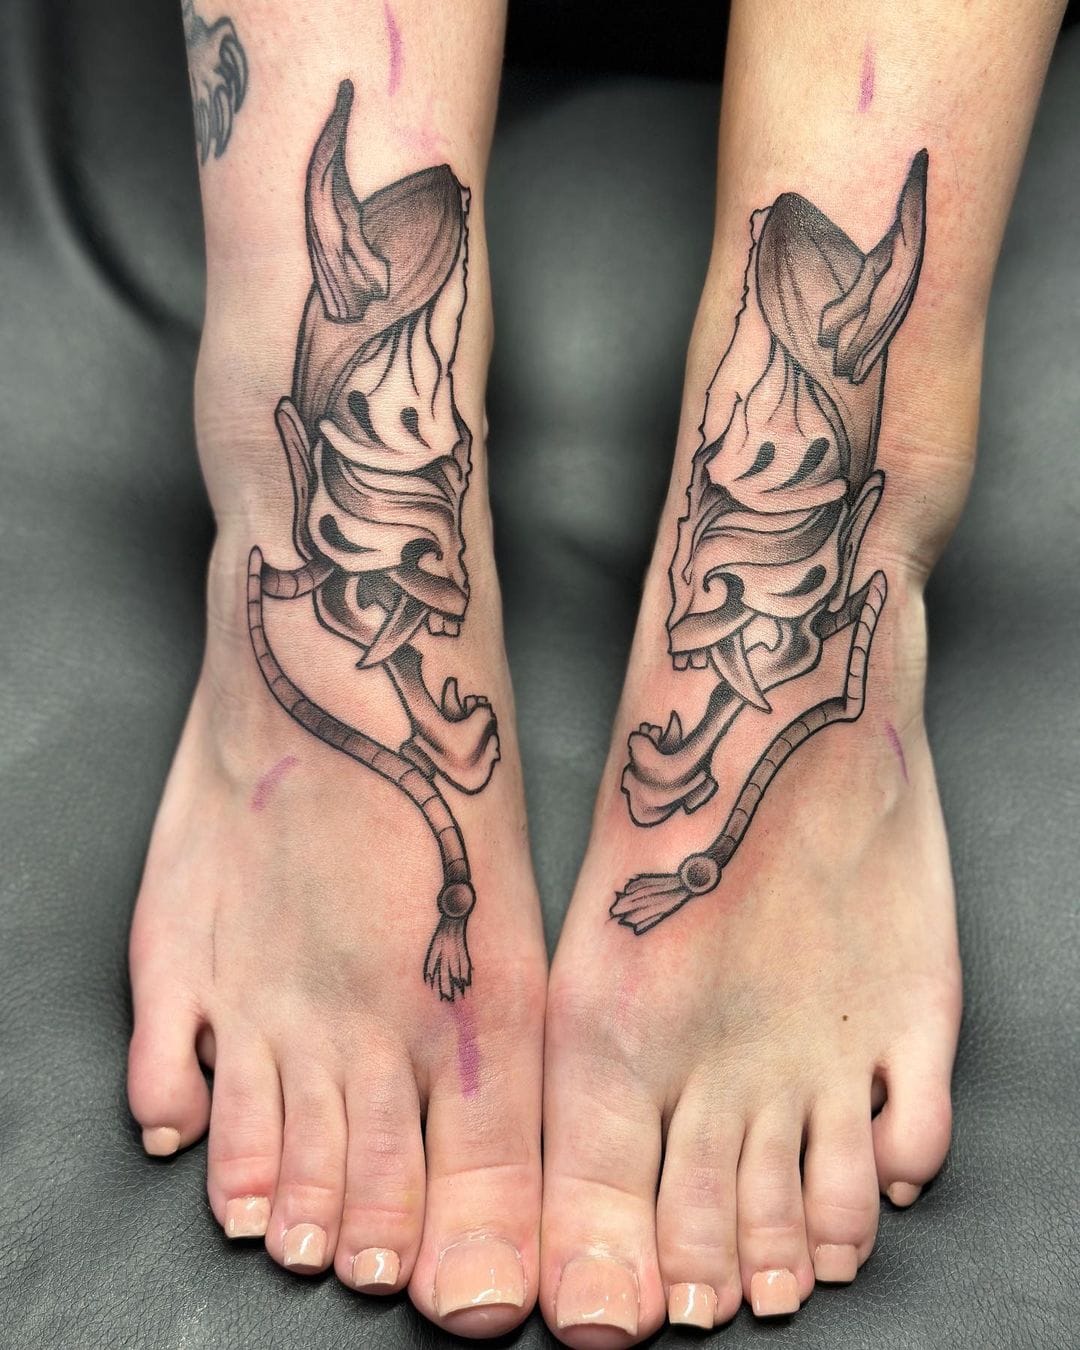 Tattoo uploaded by Zombie Outlaw Tattoos • I got one foot in the grave •  Tattoodo